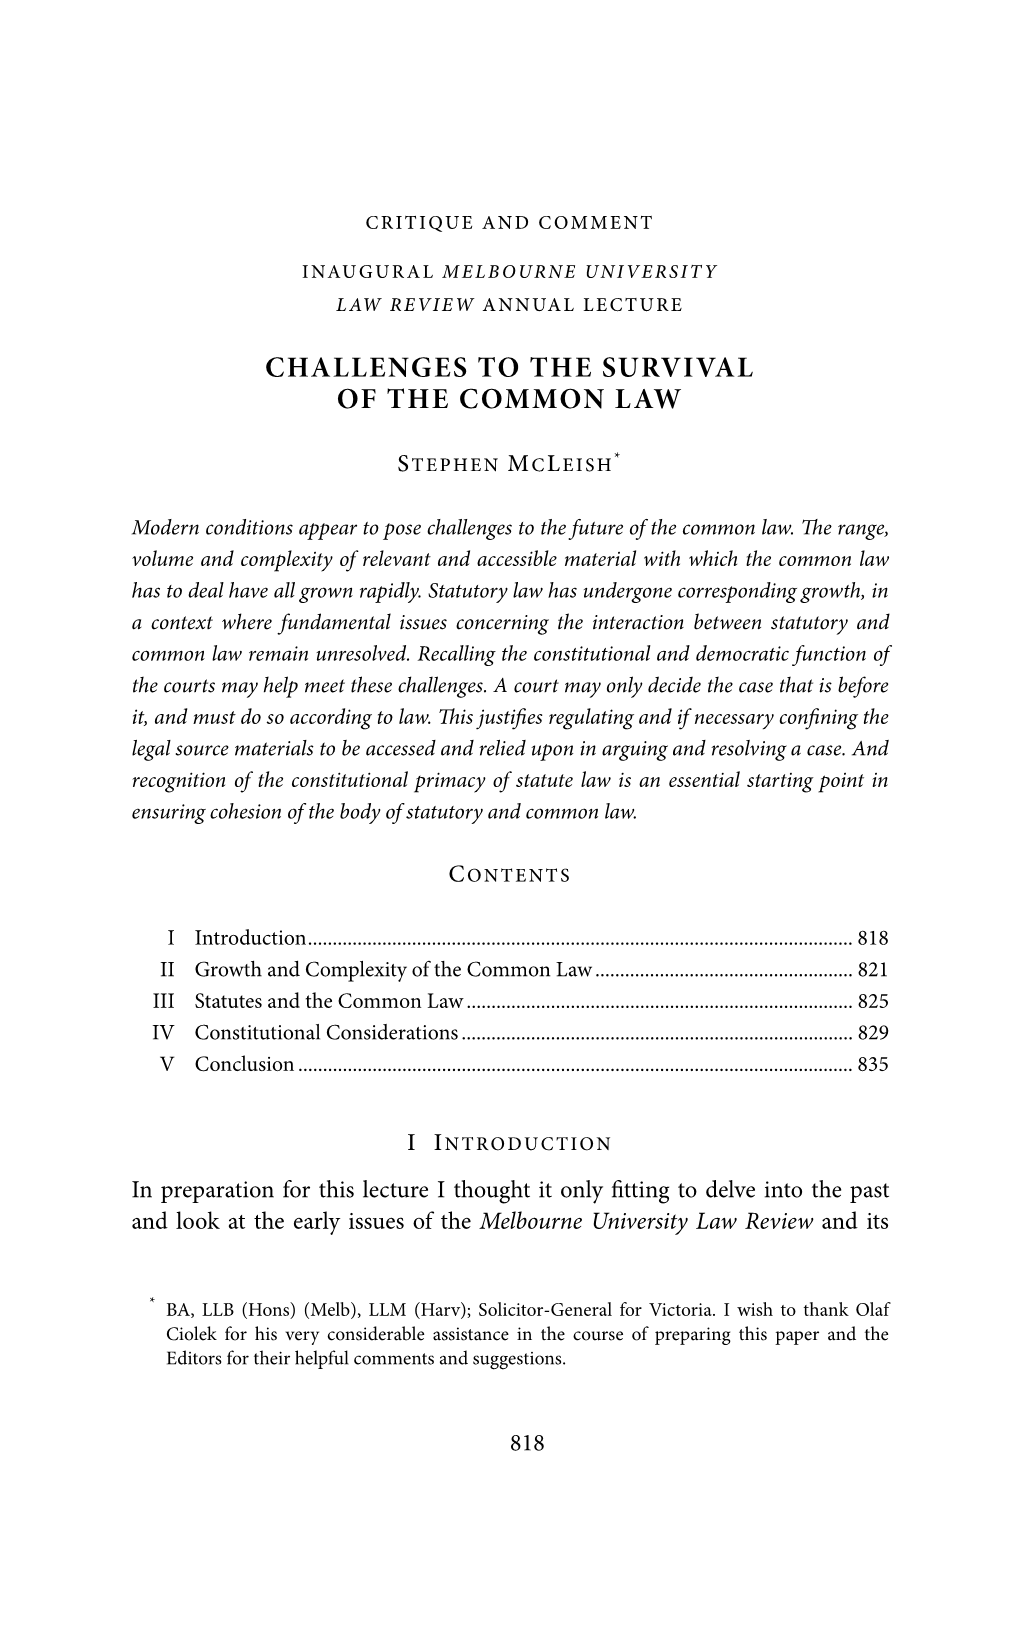 Challenges to the Survival of the Common Law